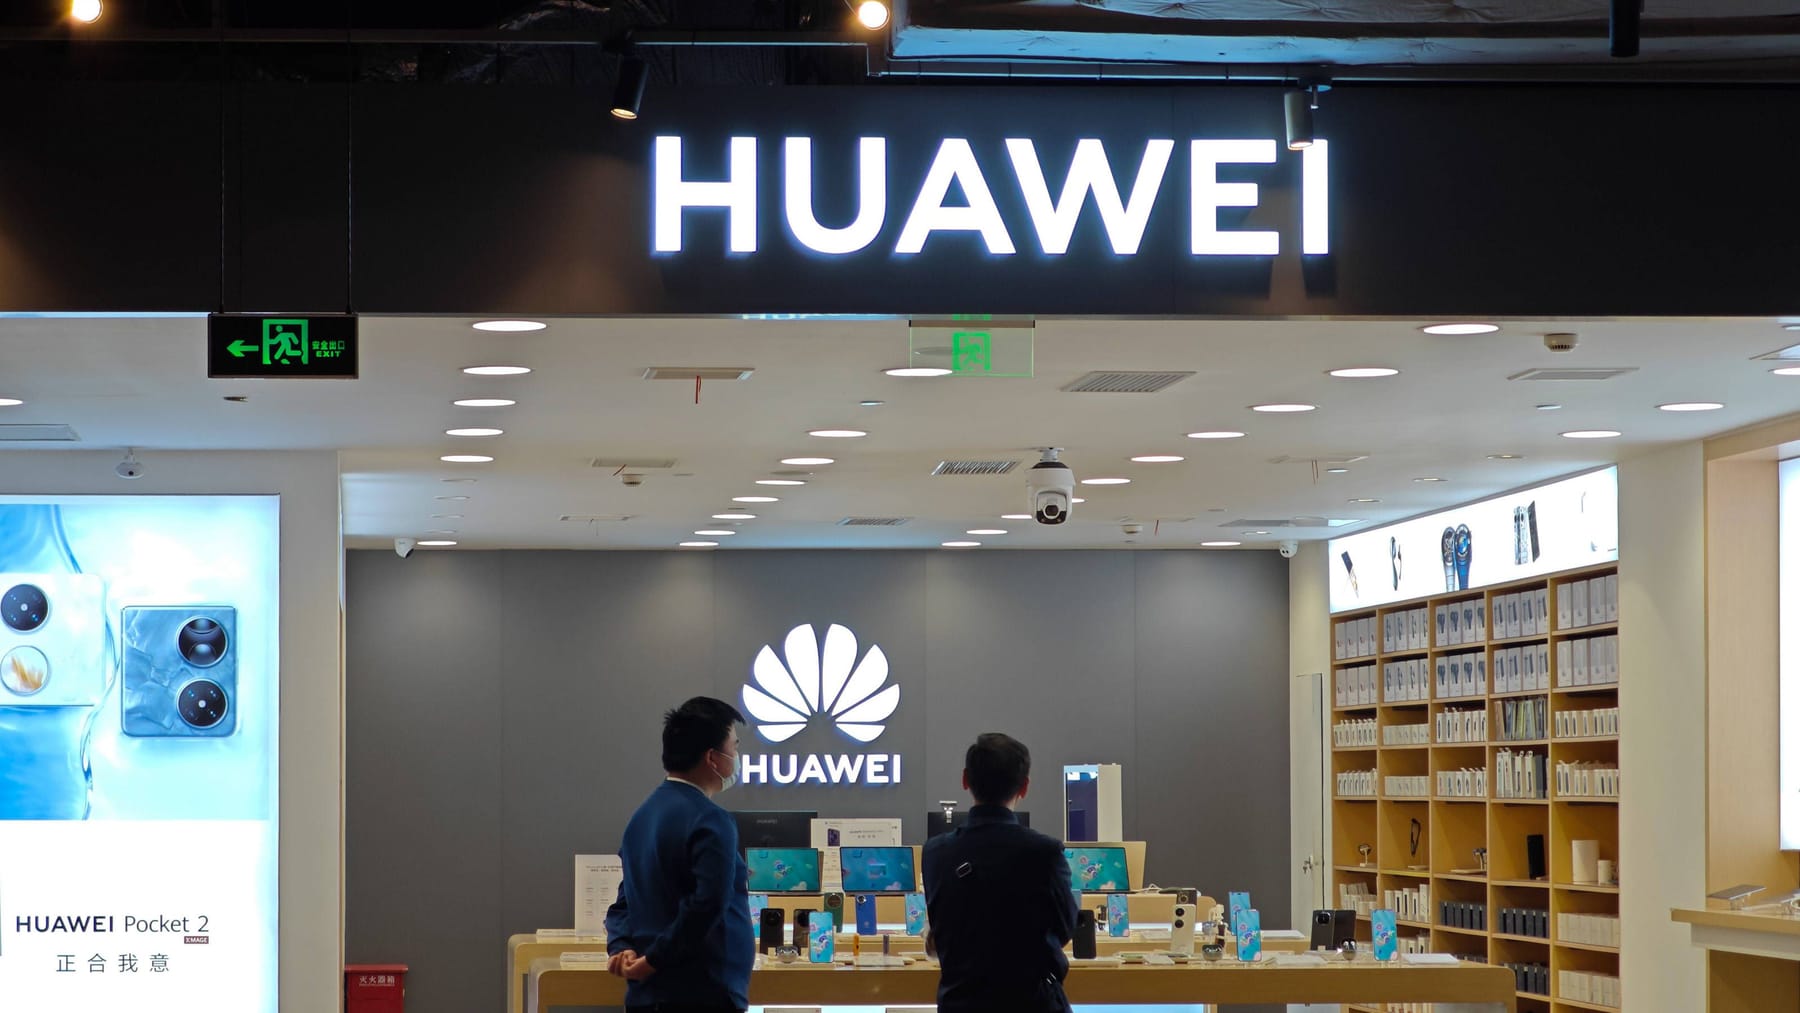 The US has taken action against the cell phone maker Huawei